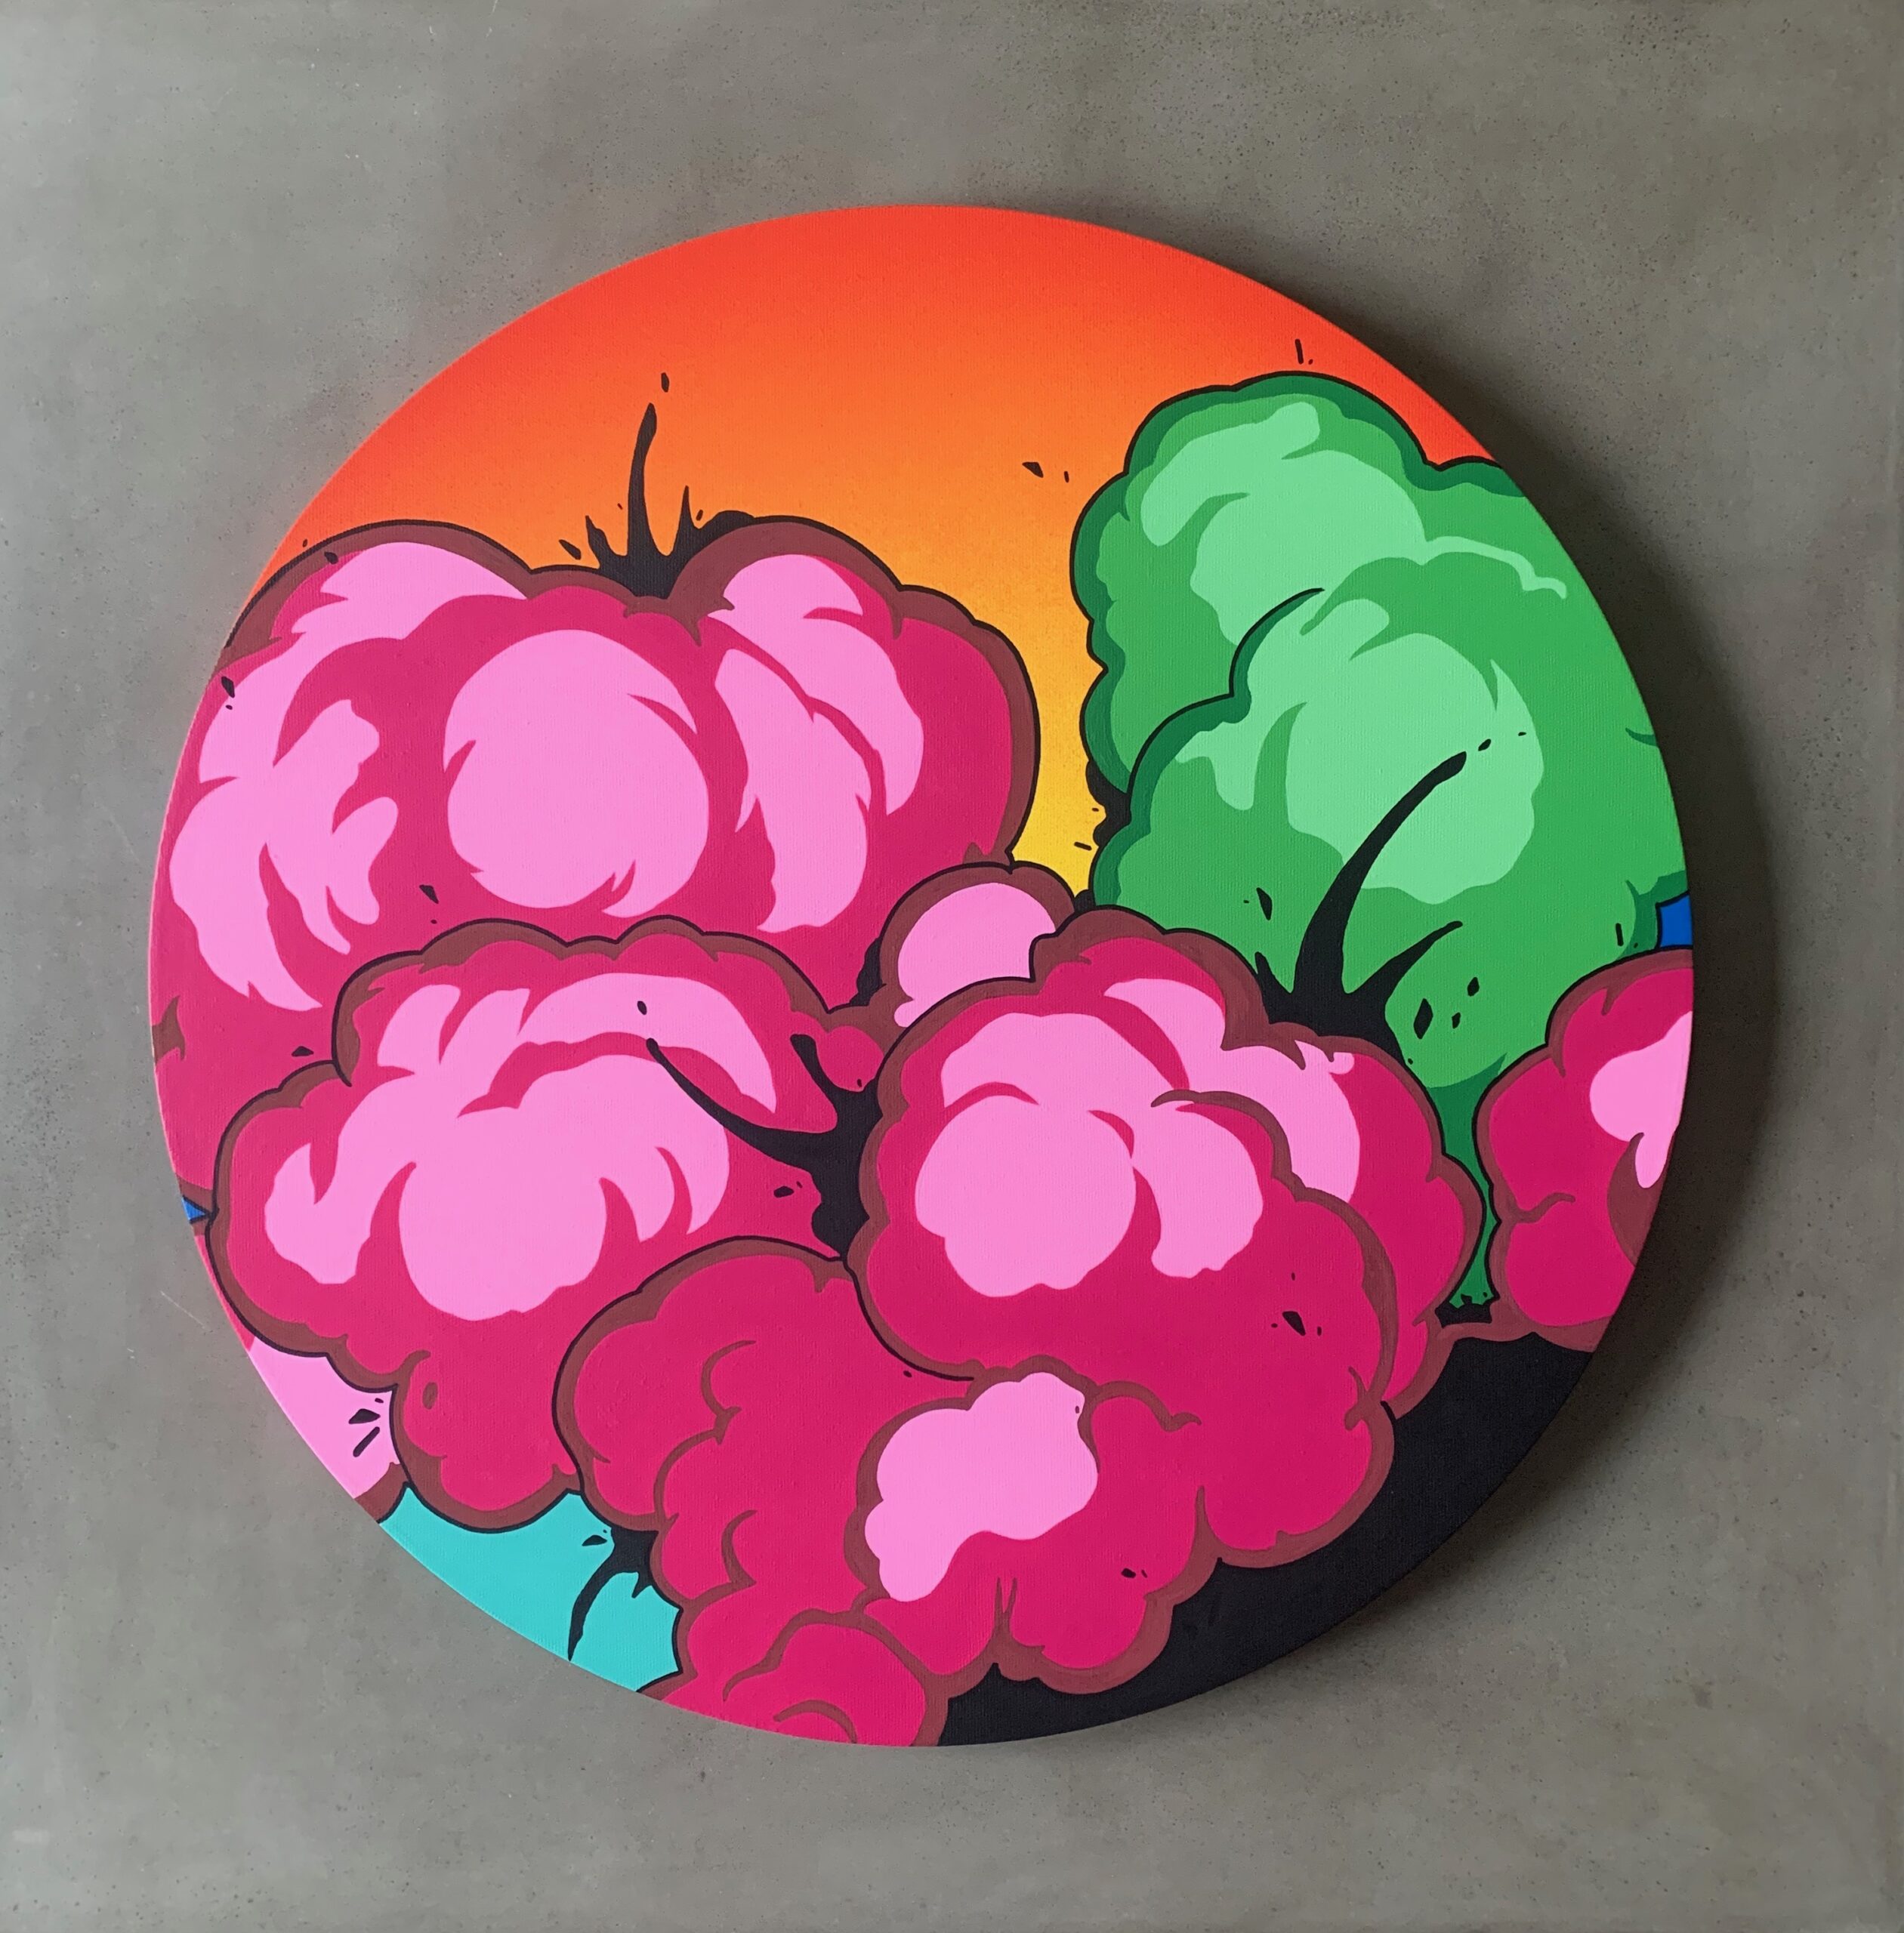 Miami, 24" Gallery Wrapped Round Canvas. Done with Acrylic Paint, 2020.